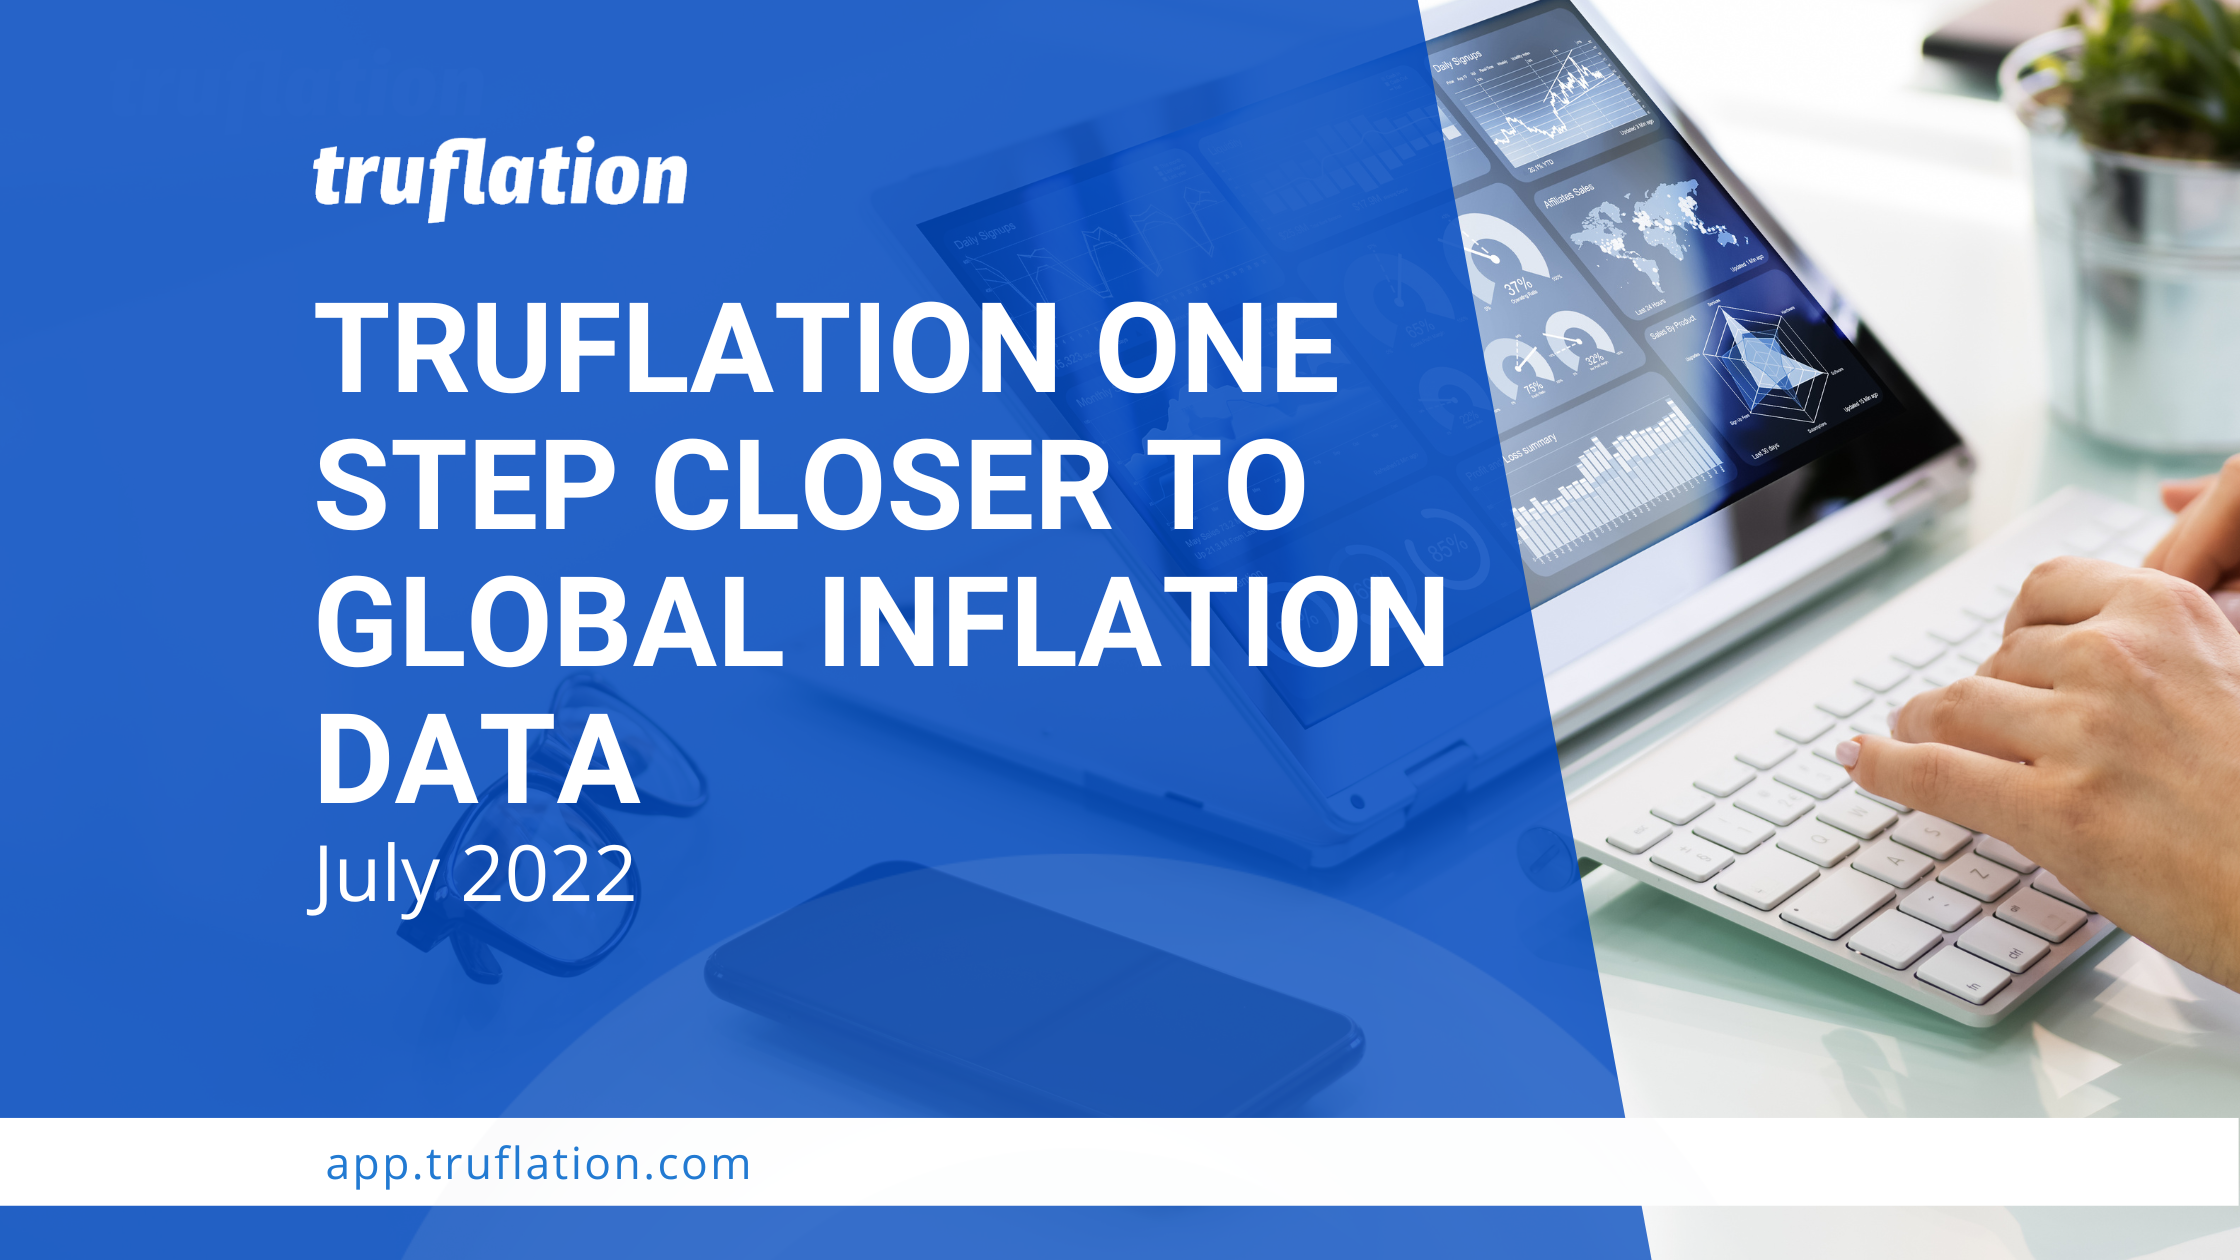 Truflation One Step Closer to Global Inflation Data.